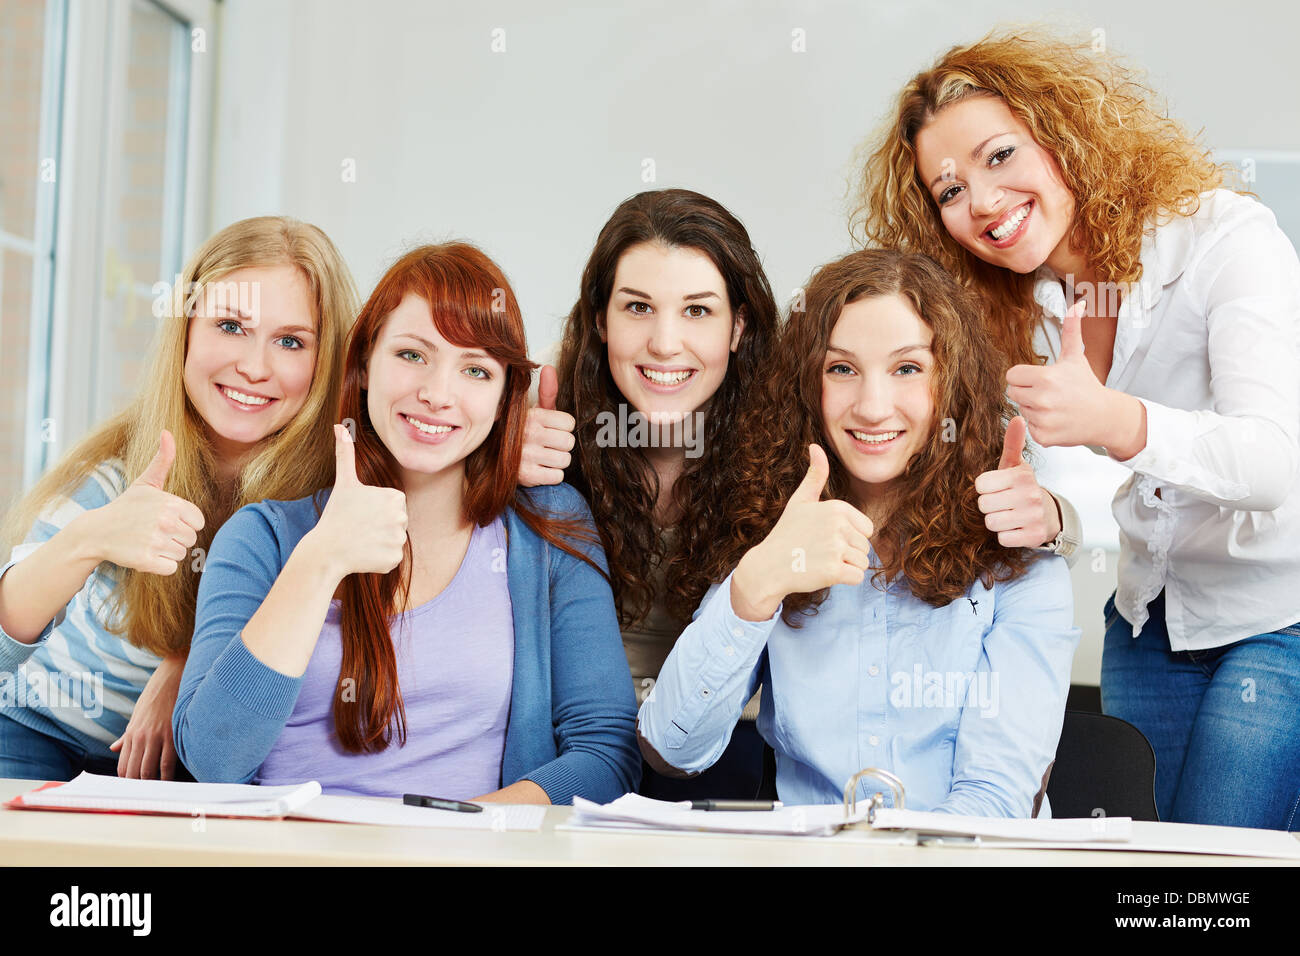 Happy successful women holding thumbs up in a university class Stock Photo